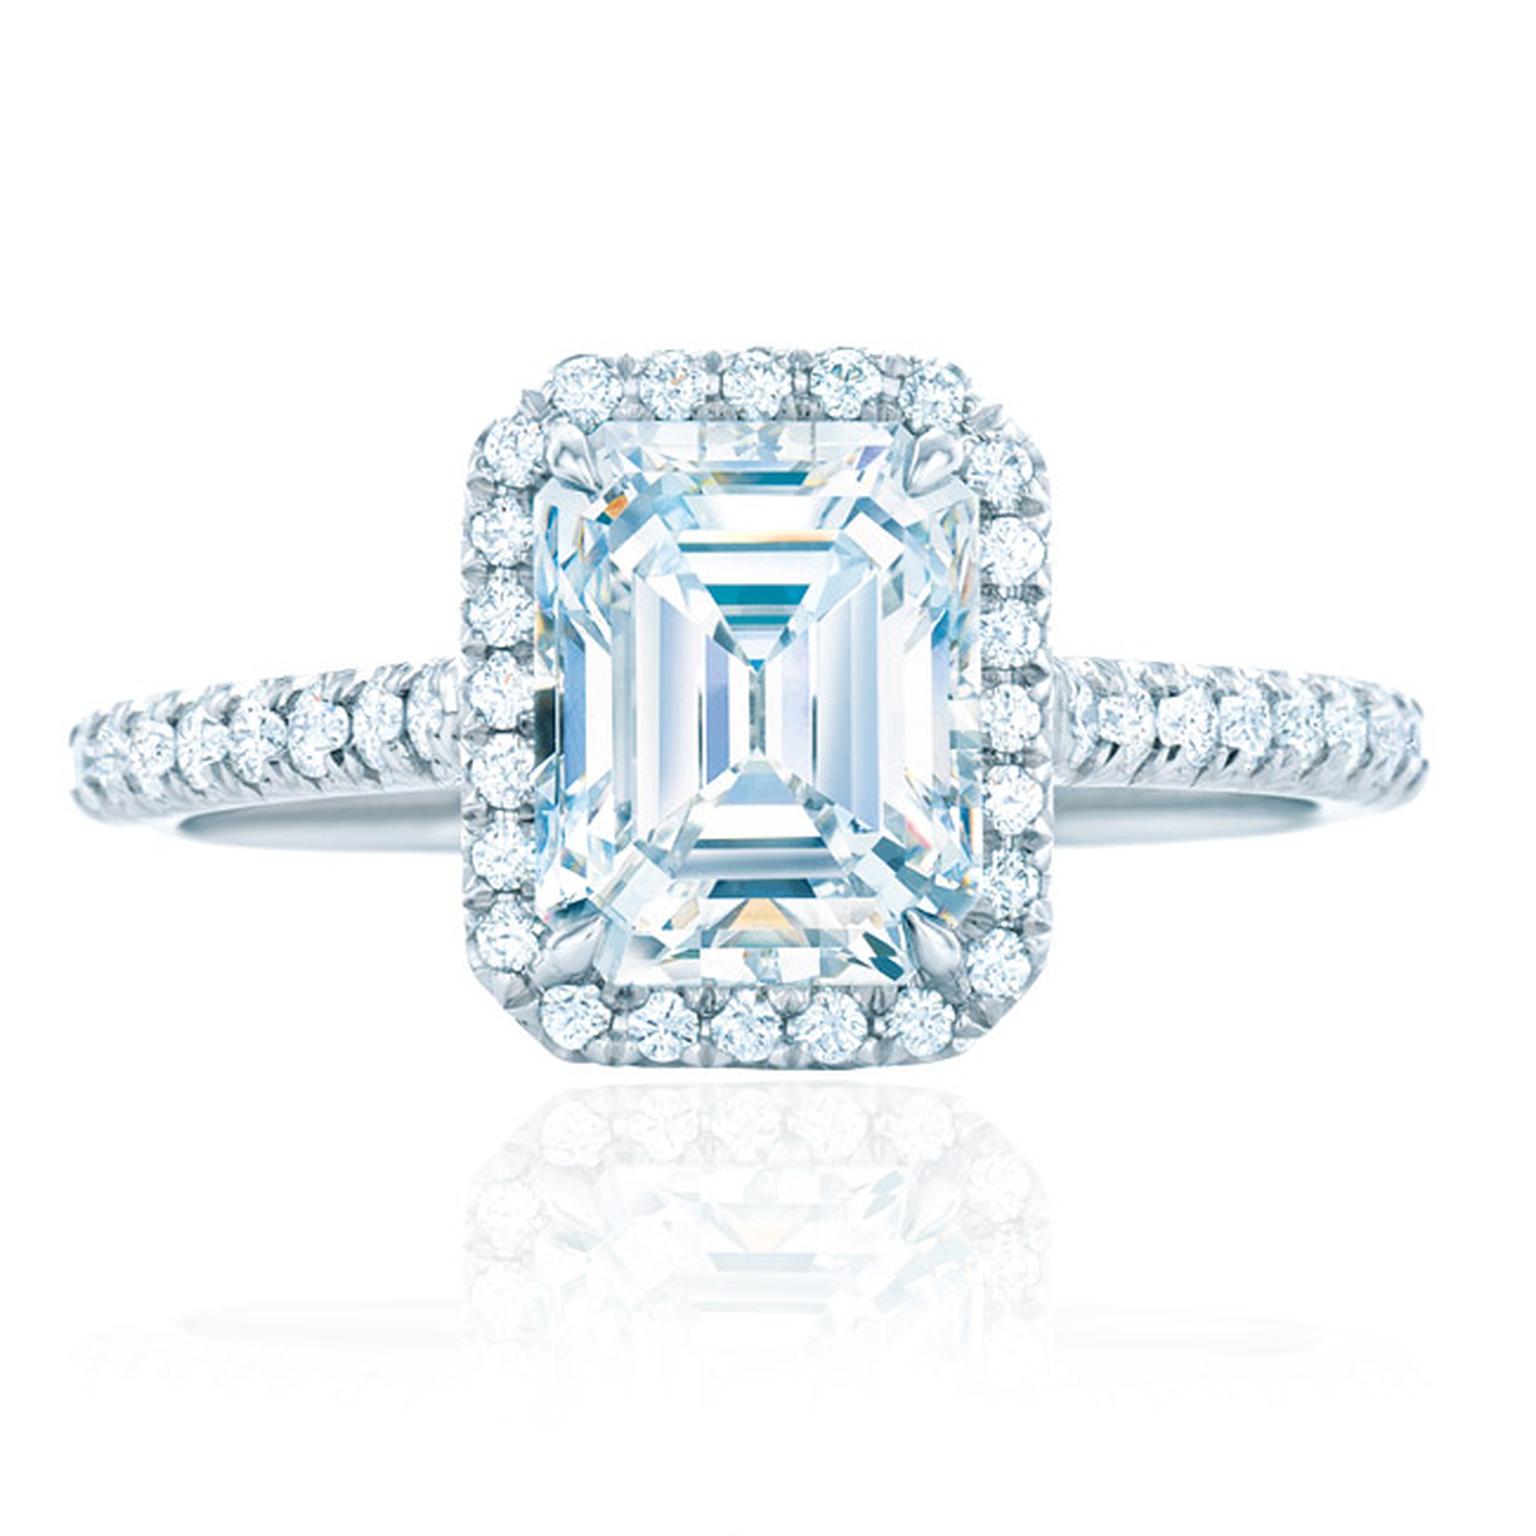 Tiffany Soleste emerald-cut diamond engagement ring featuring bead-set diamonds surrounding the central diamond and encircling the band (available from 0.25ct to 2.5ct).